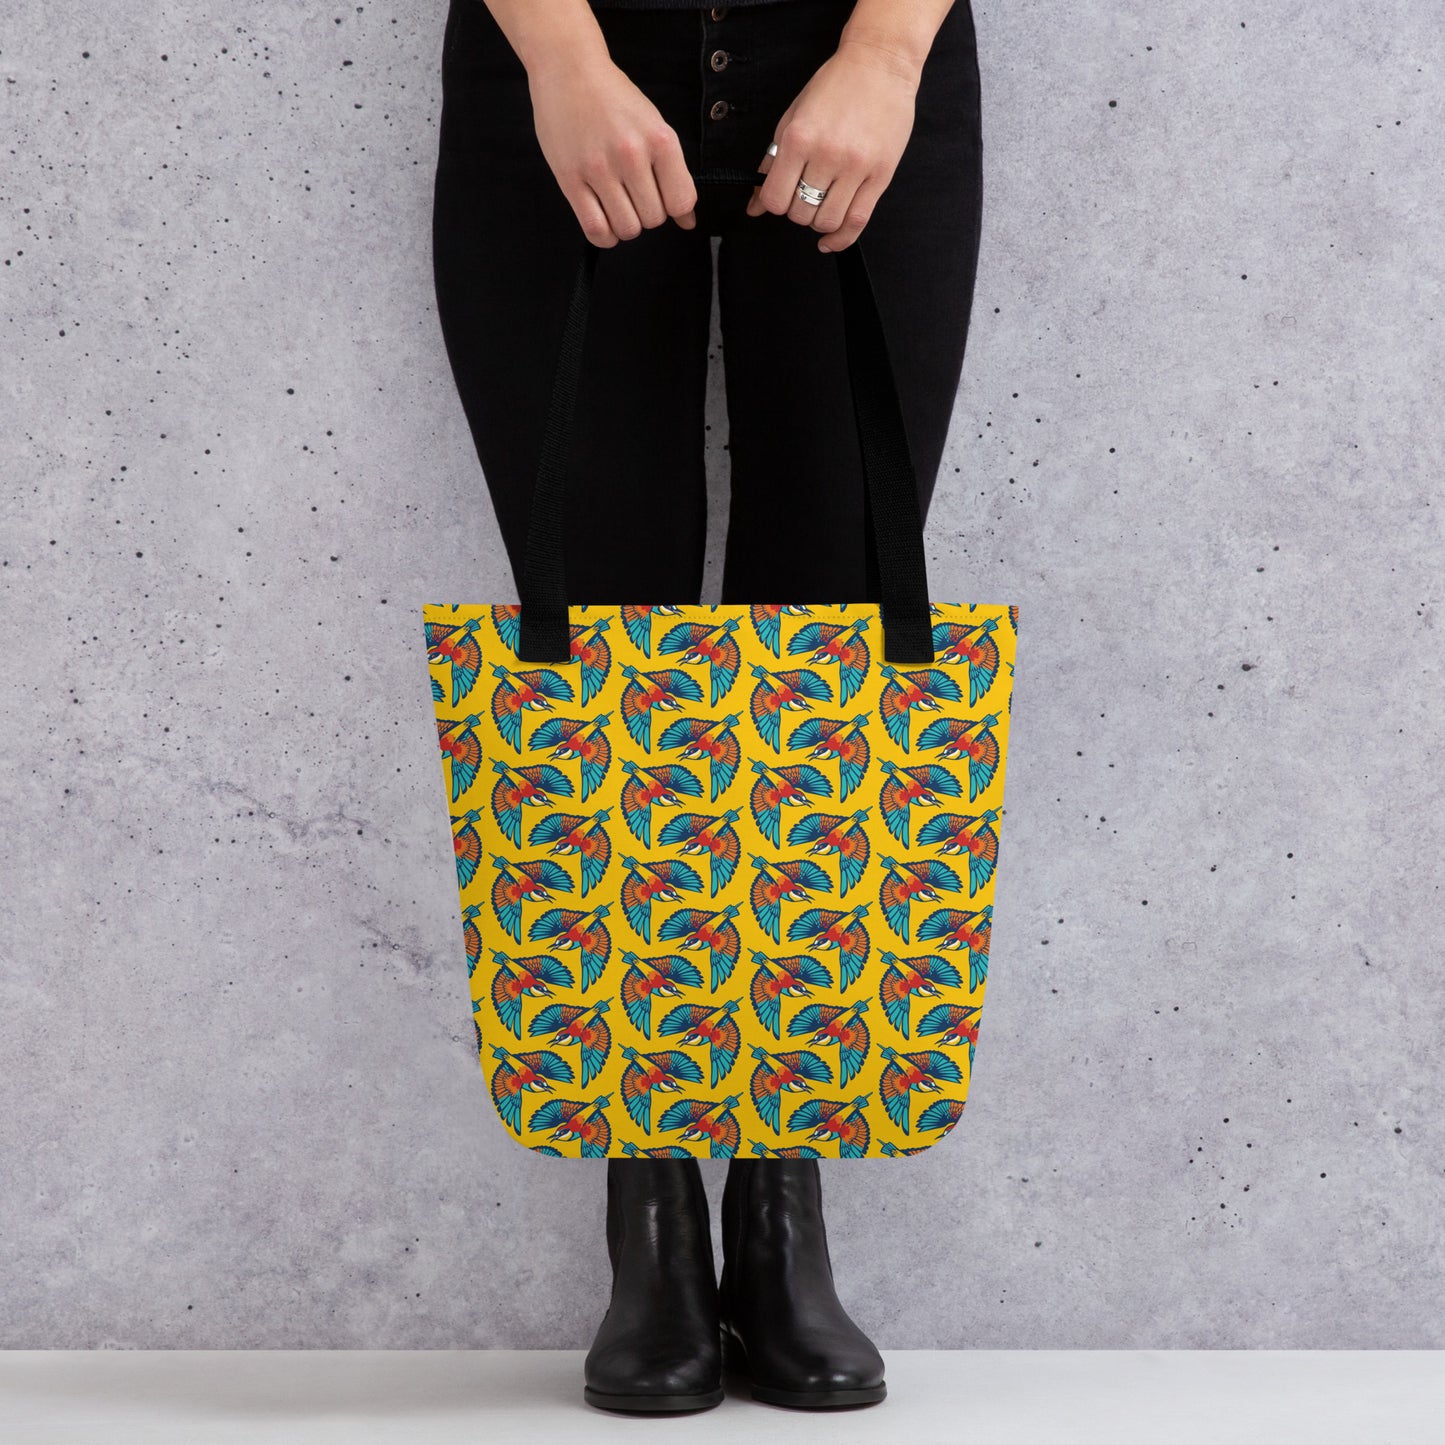 Better With Birds Tote Bag